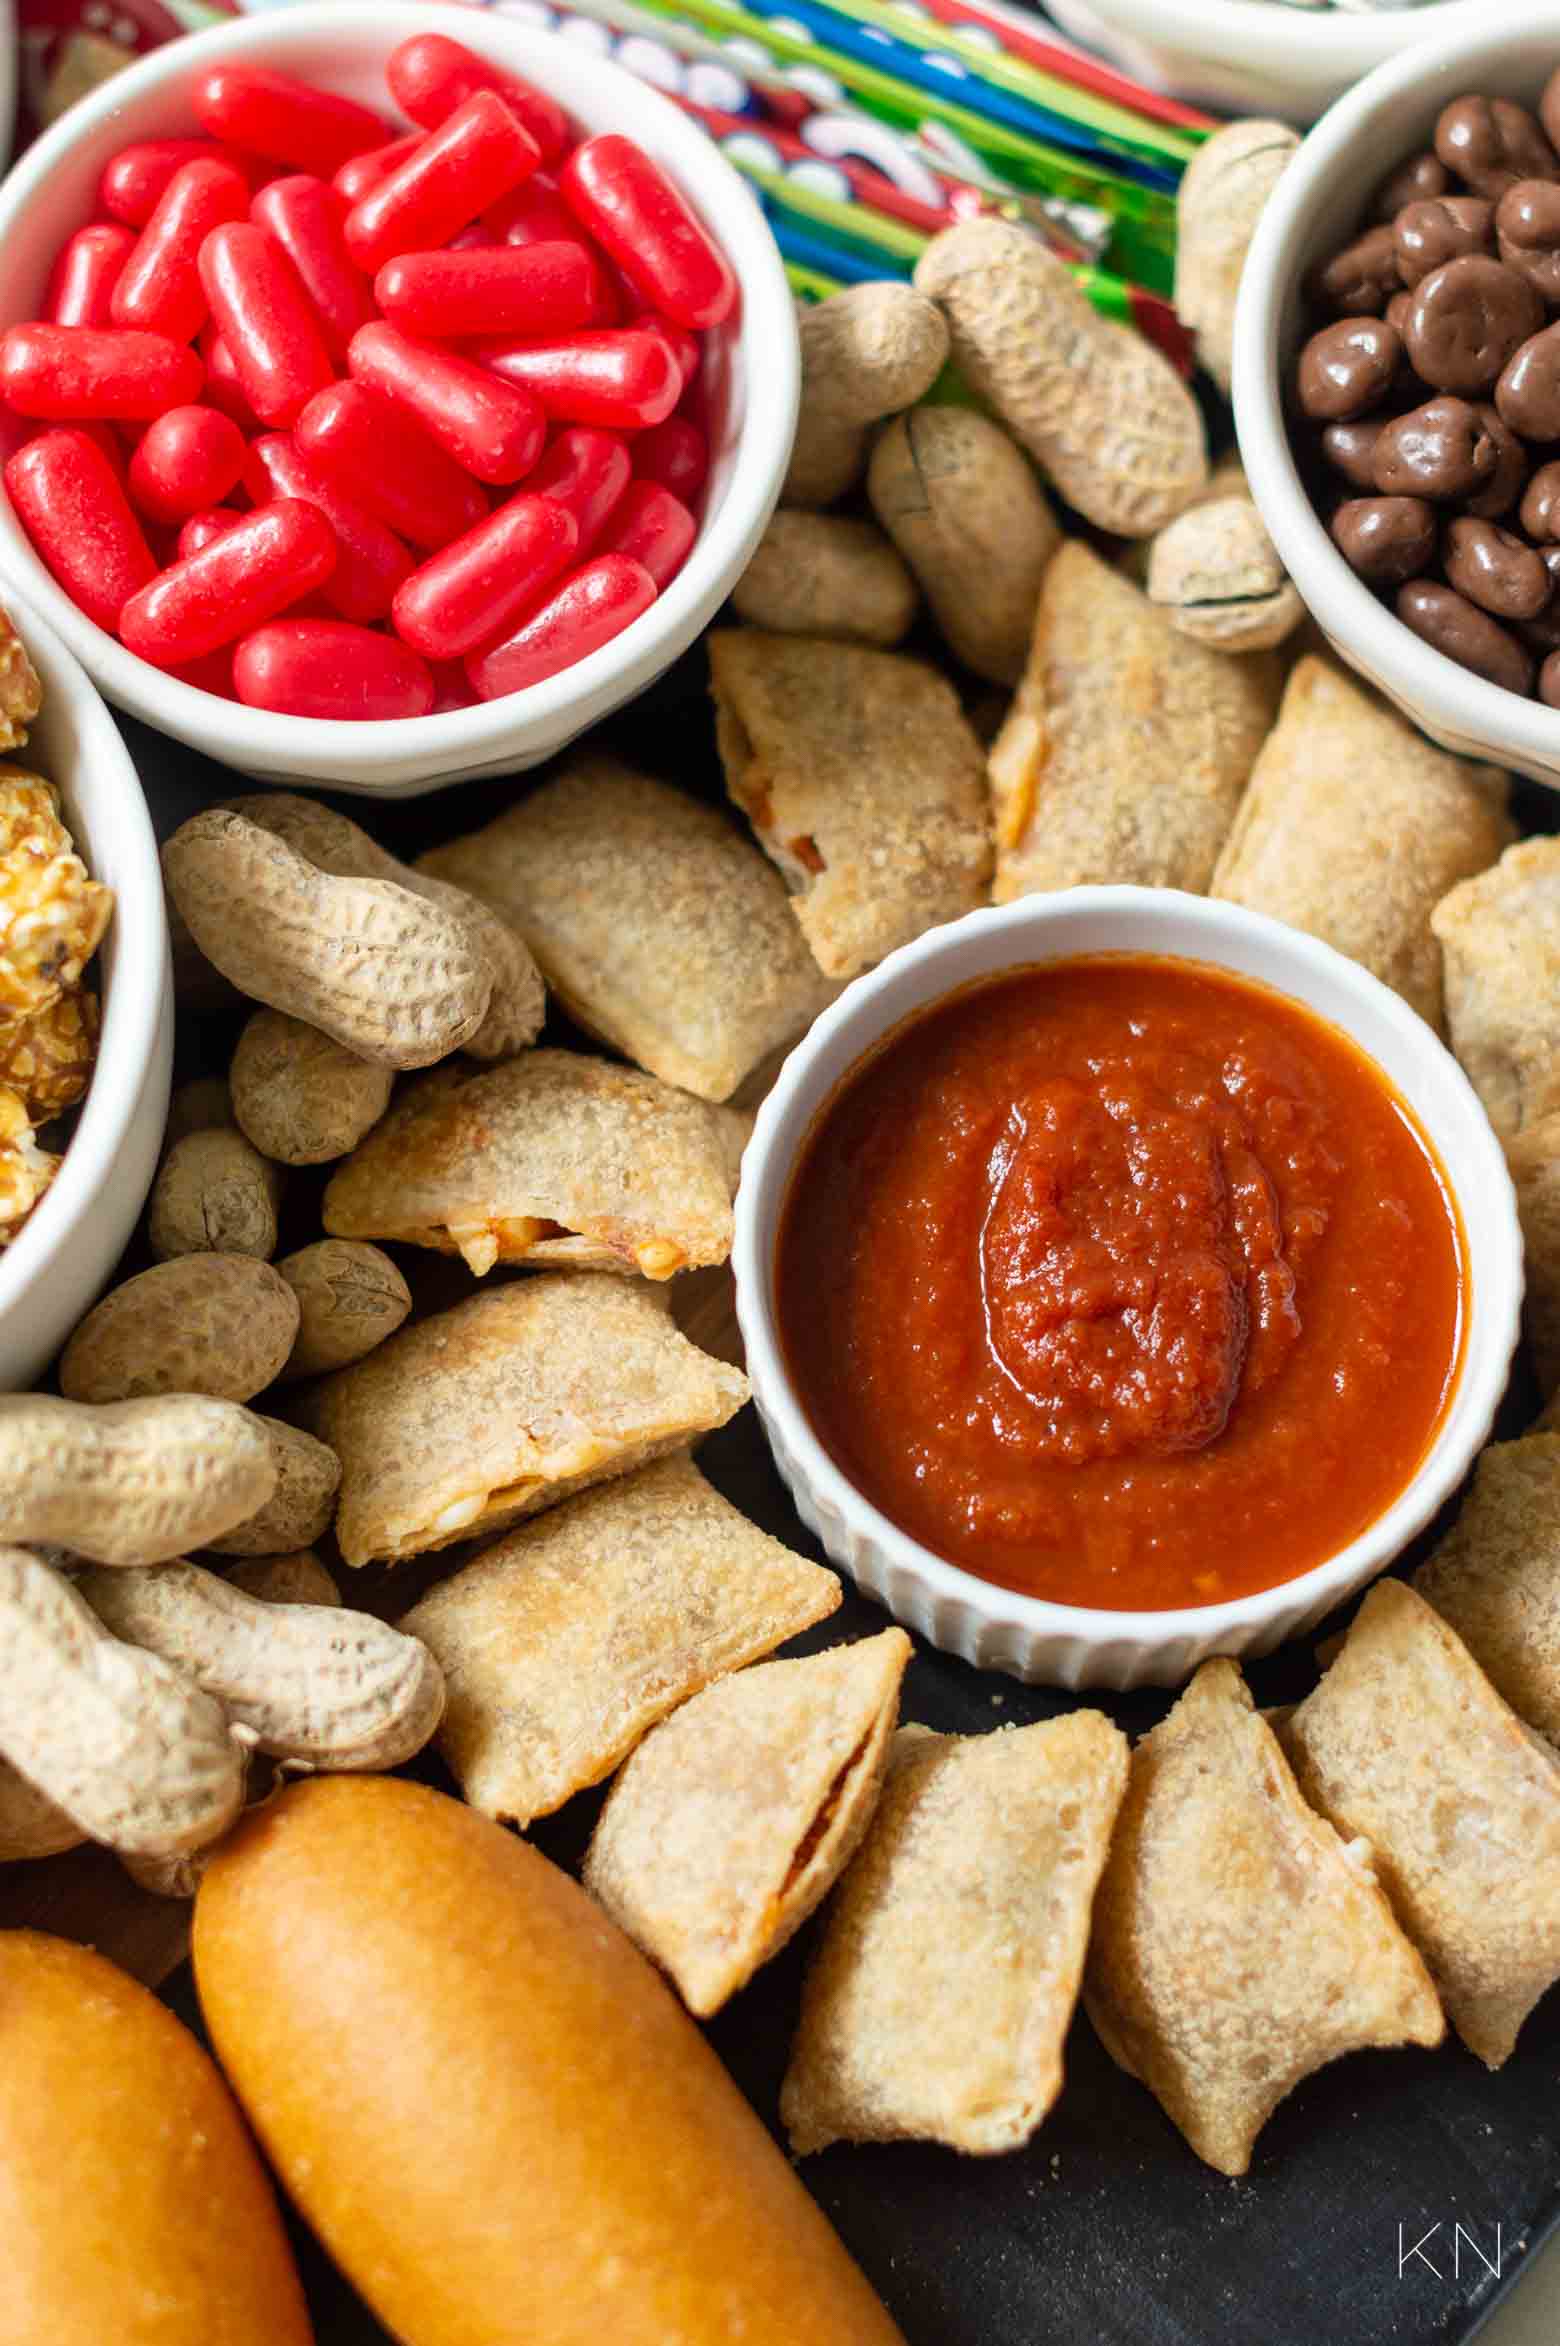 At Home Football Party Snacks